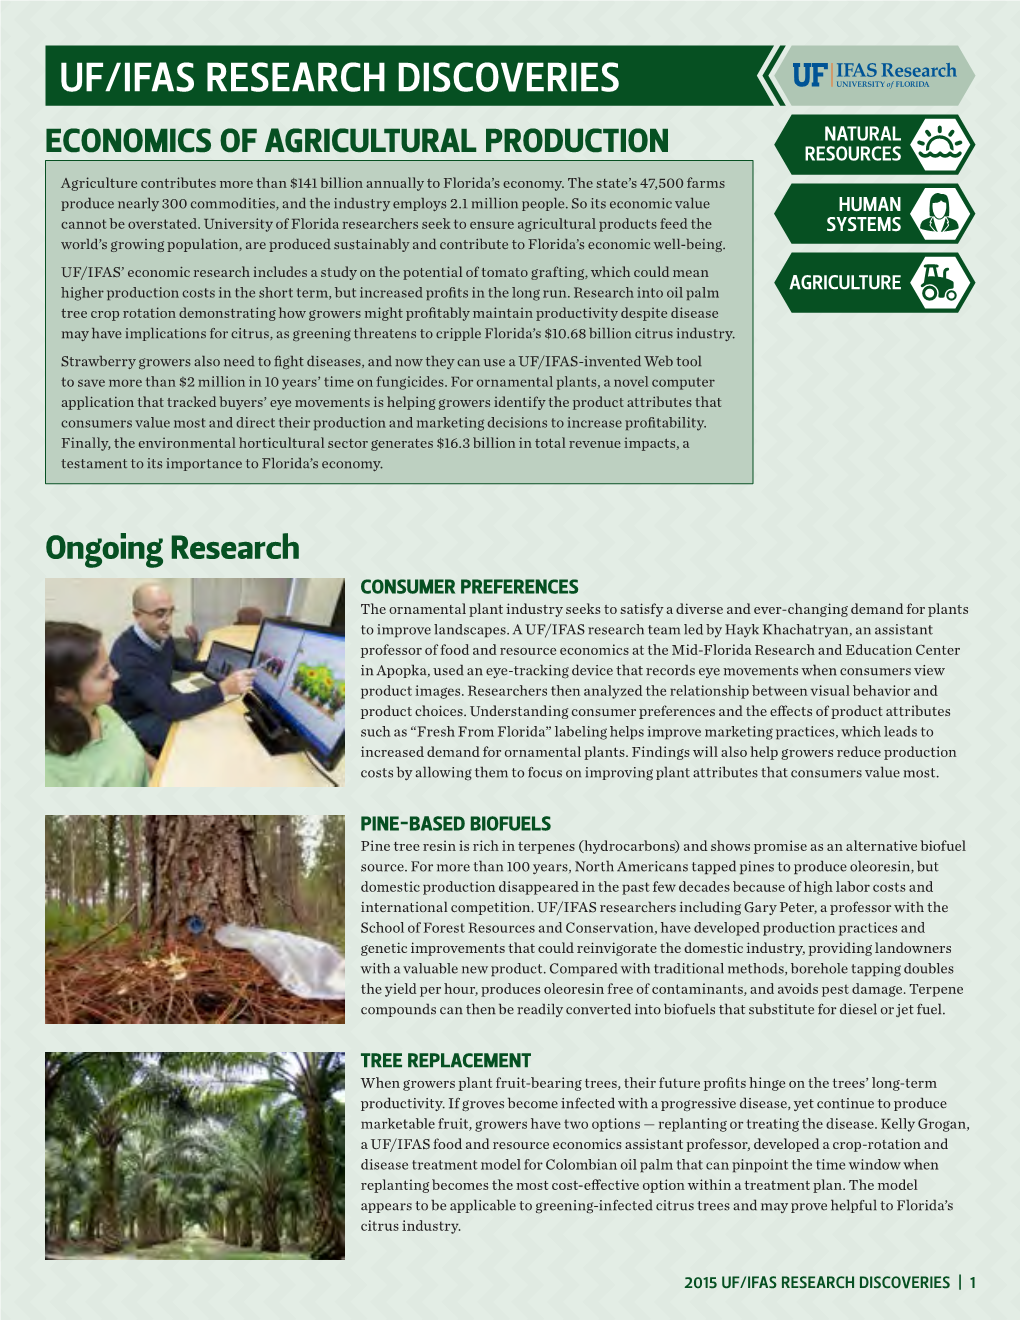 UF/IFAS Research Discoveries Overview